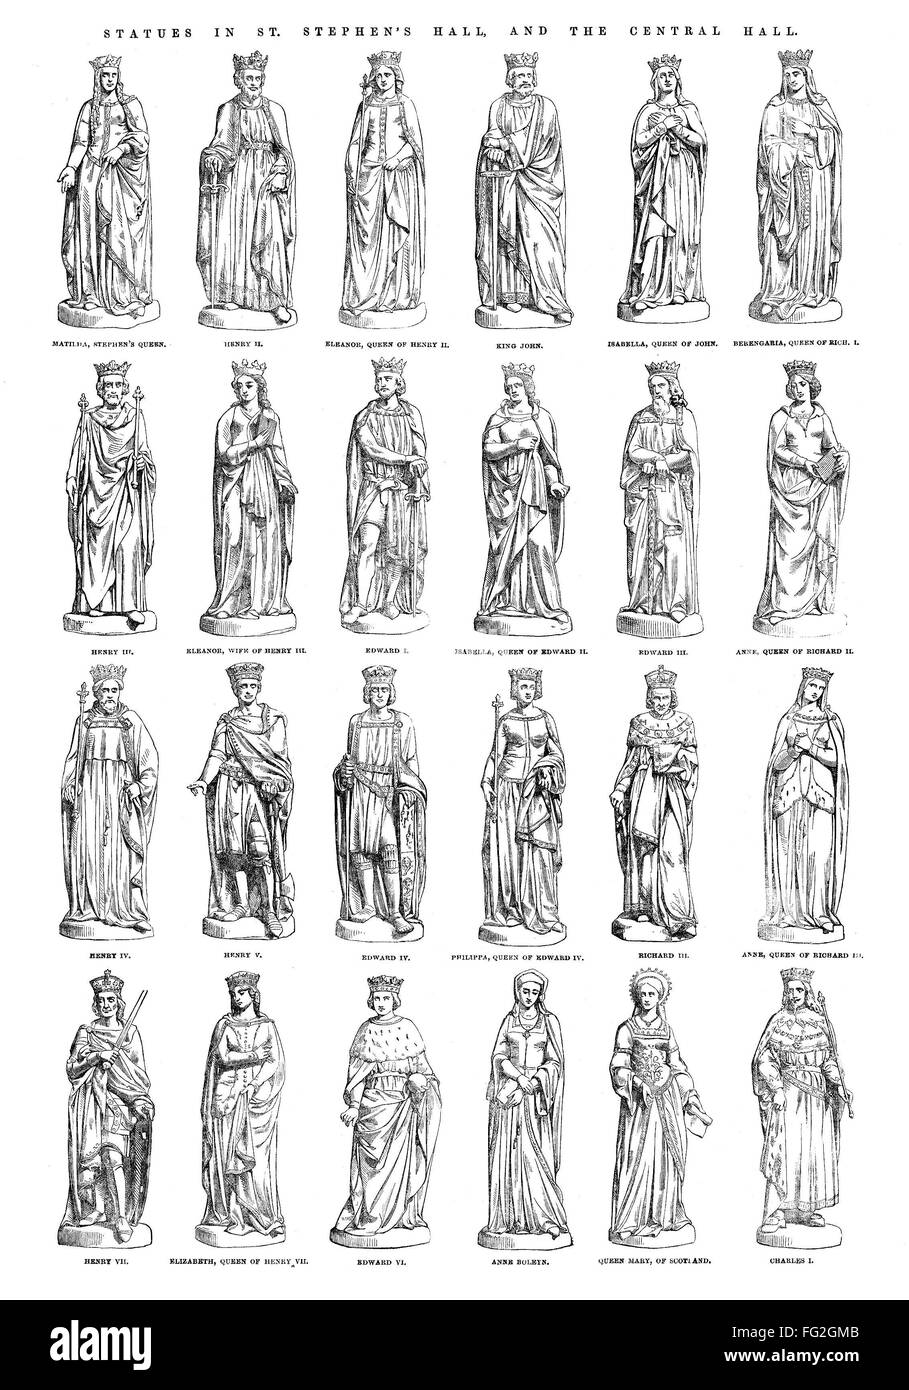 BRITISH ROYALTY, 1854. /nStatues of the kings and queens of England, from St. Stephen's Hall and Central Hall at Westminster Palace in London. Engraving, English, 1854. Stock Photo